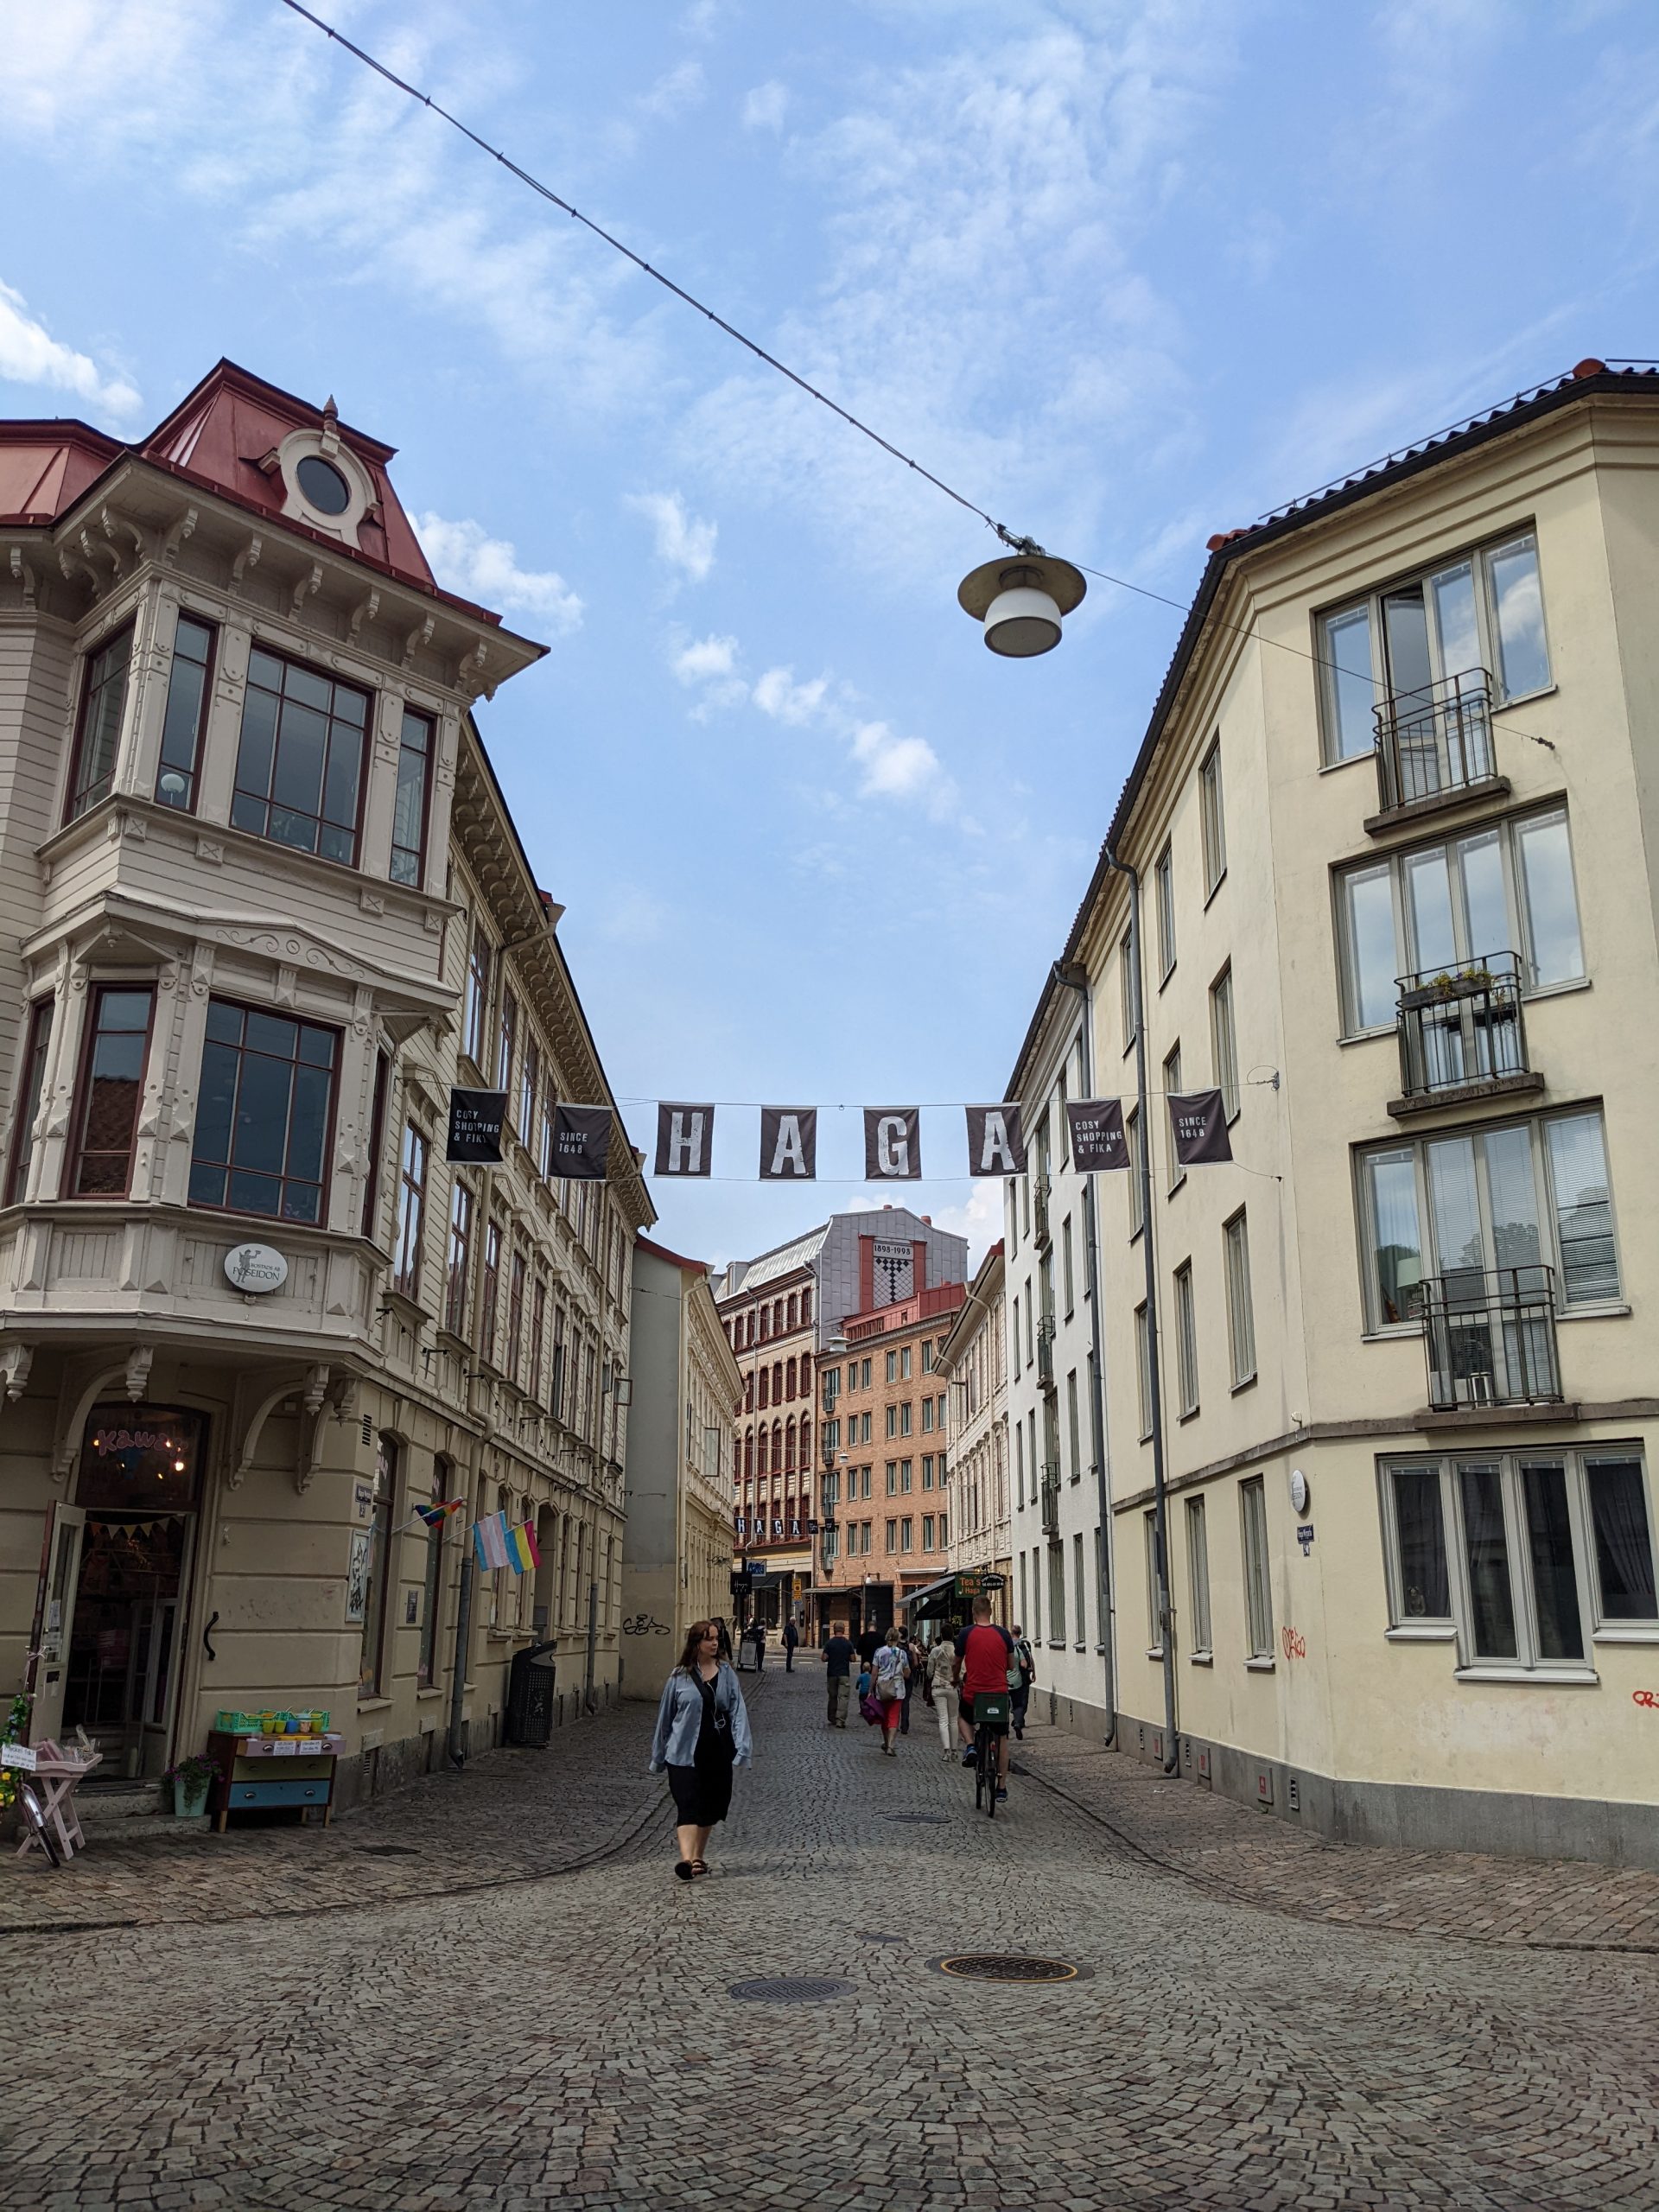 A old city with a banner that says HAGA strung between the buildings